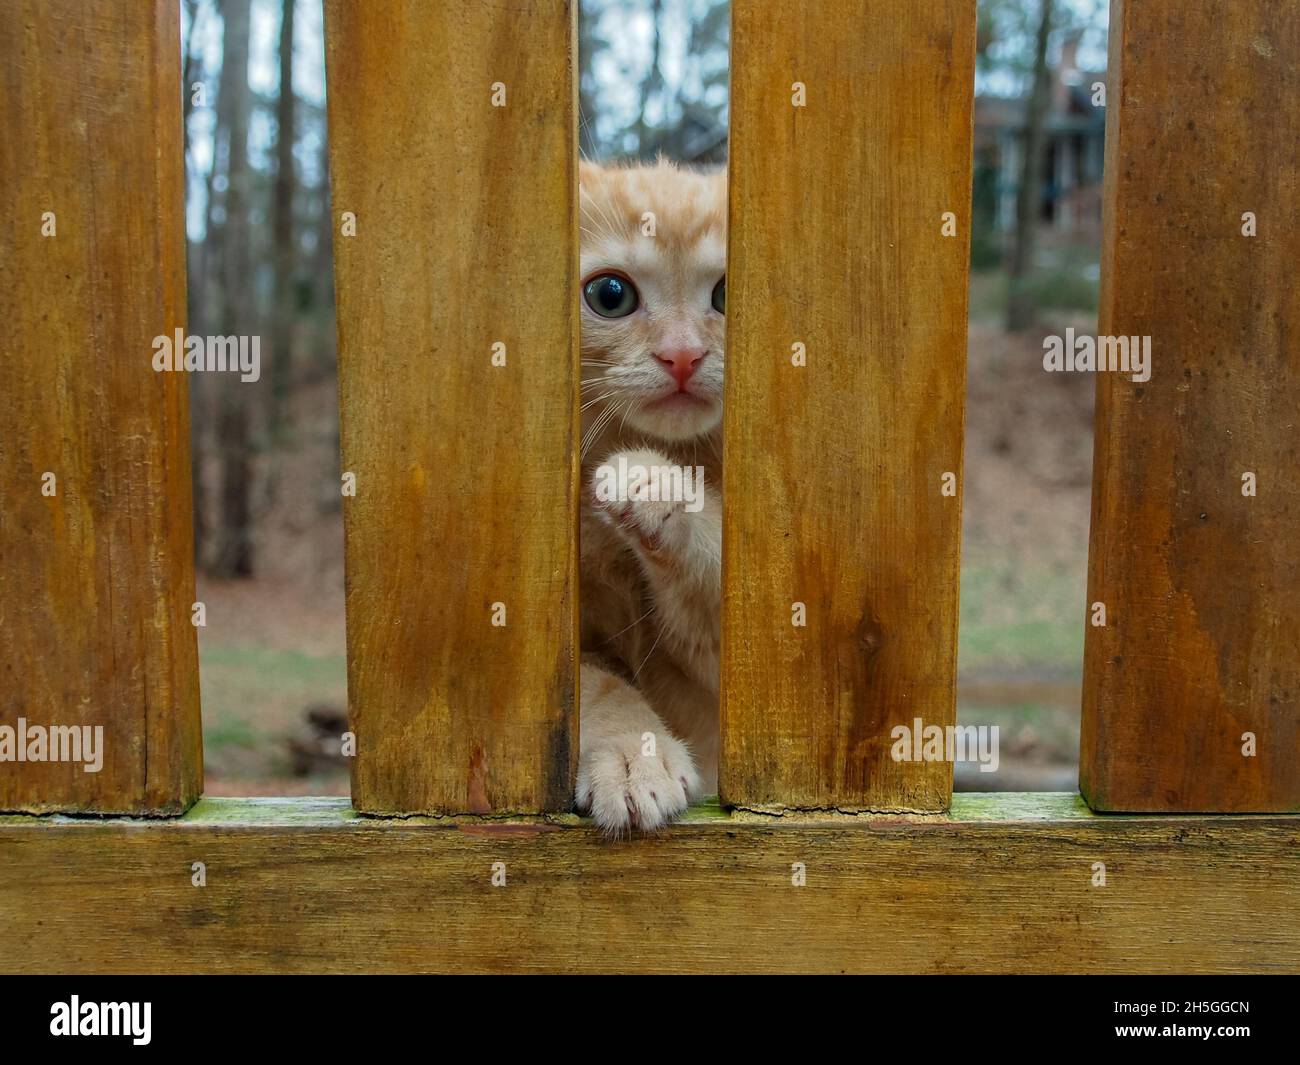 Ginger kitten reaching paw between slats of a wood park bench, looking at camera, pleading Stock Photo